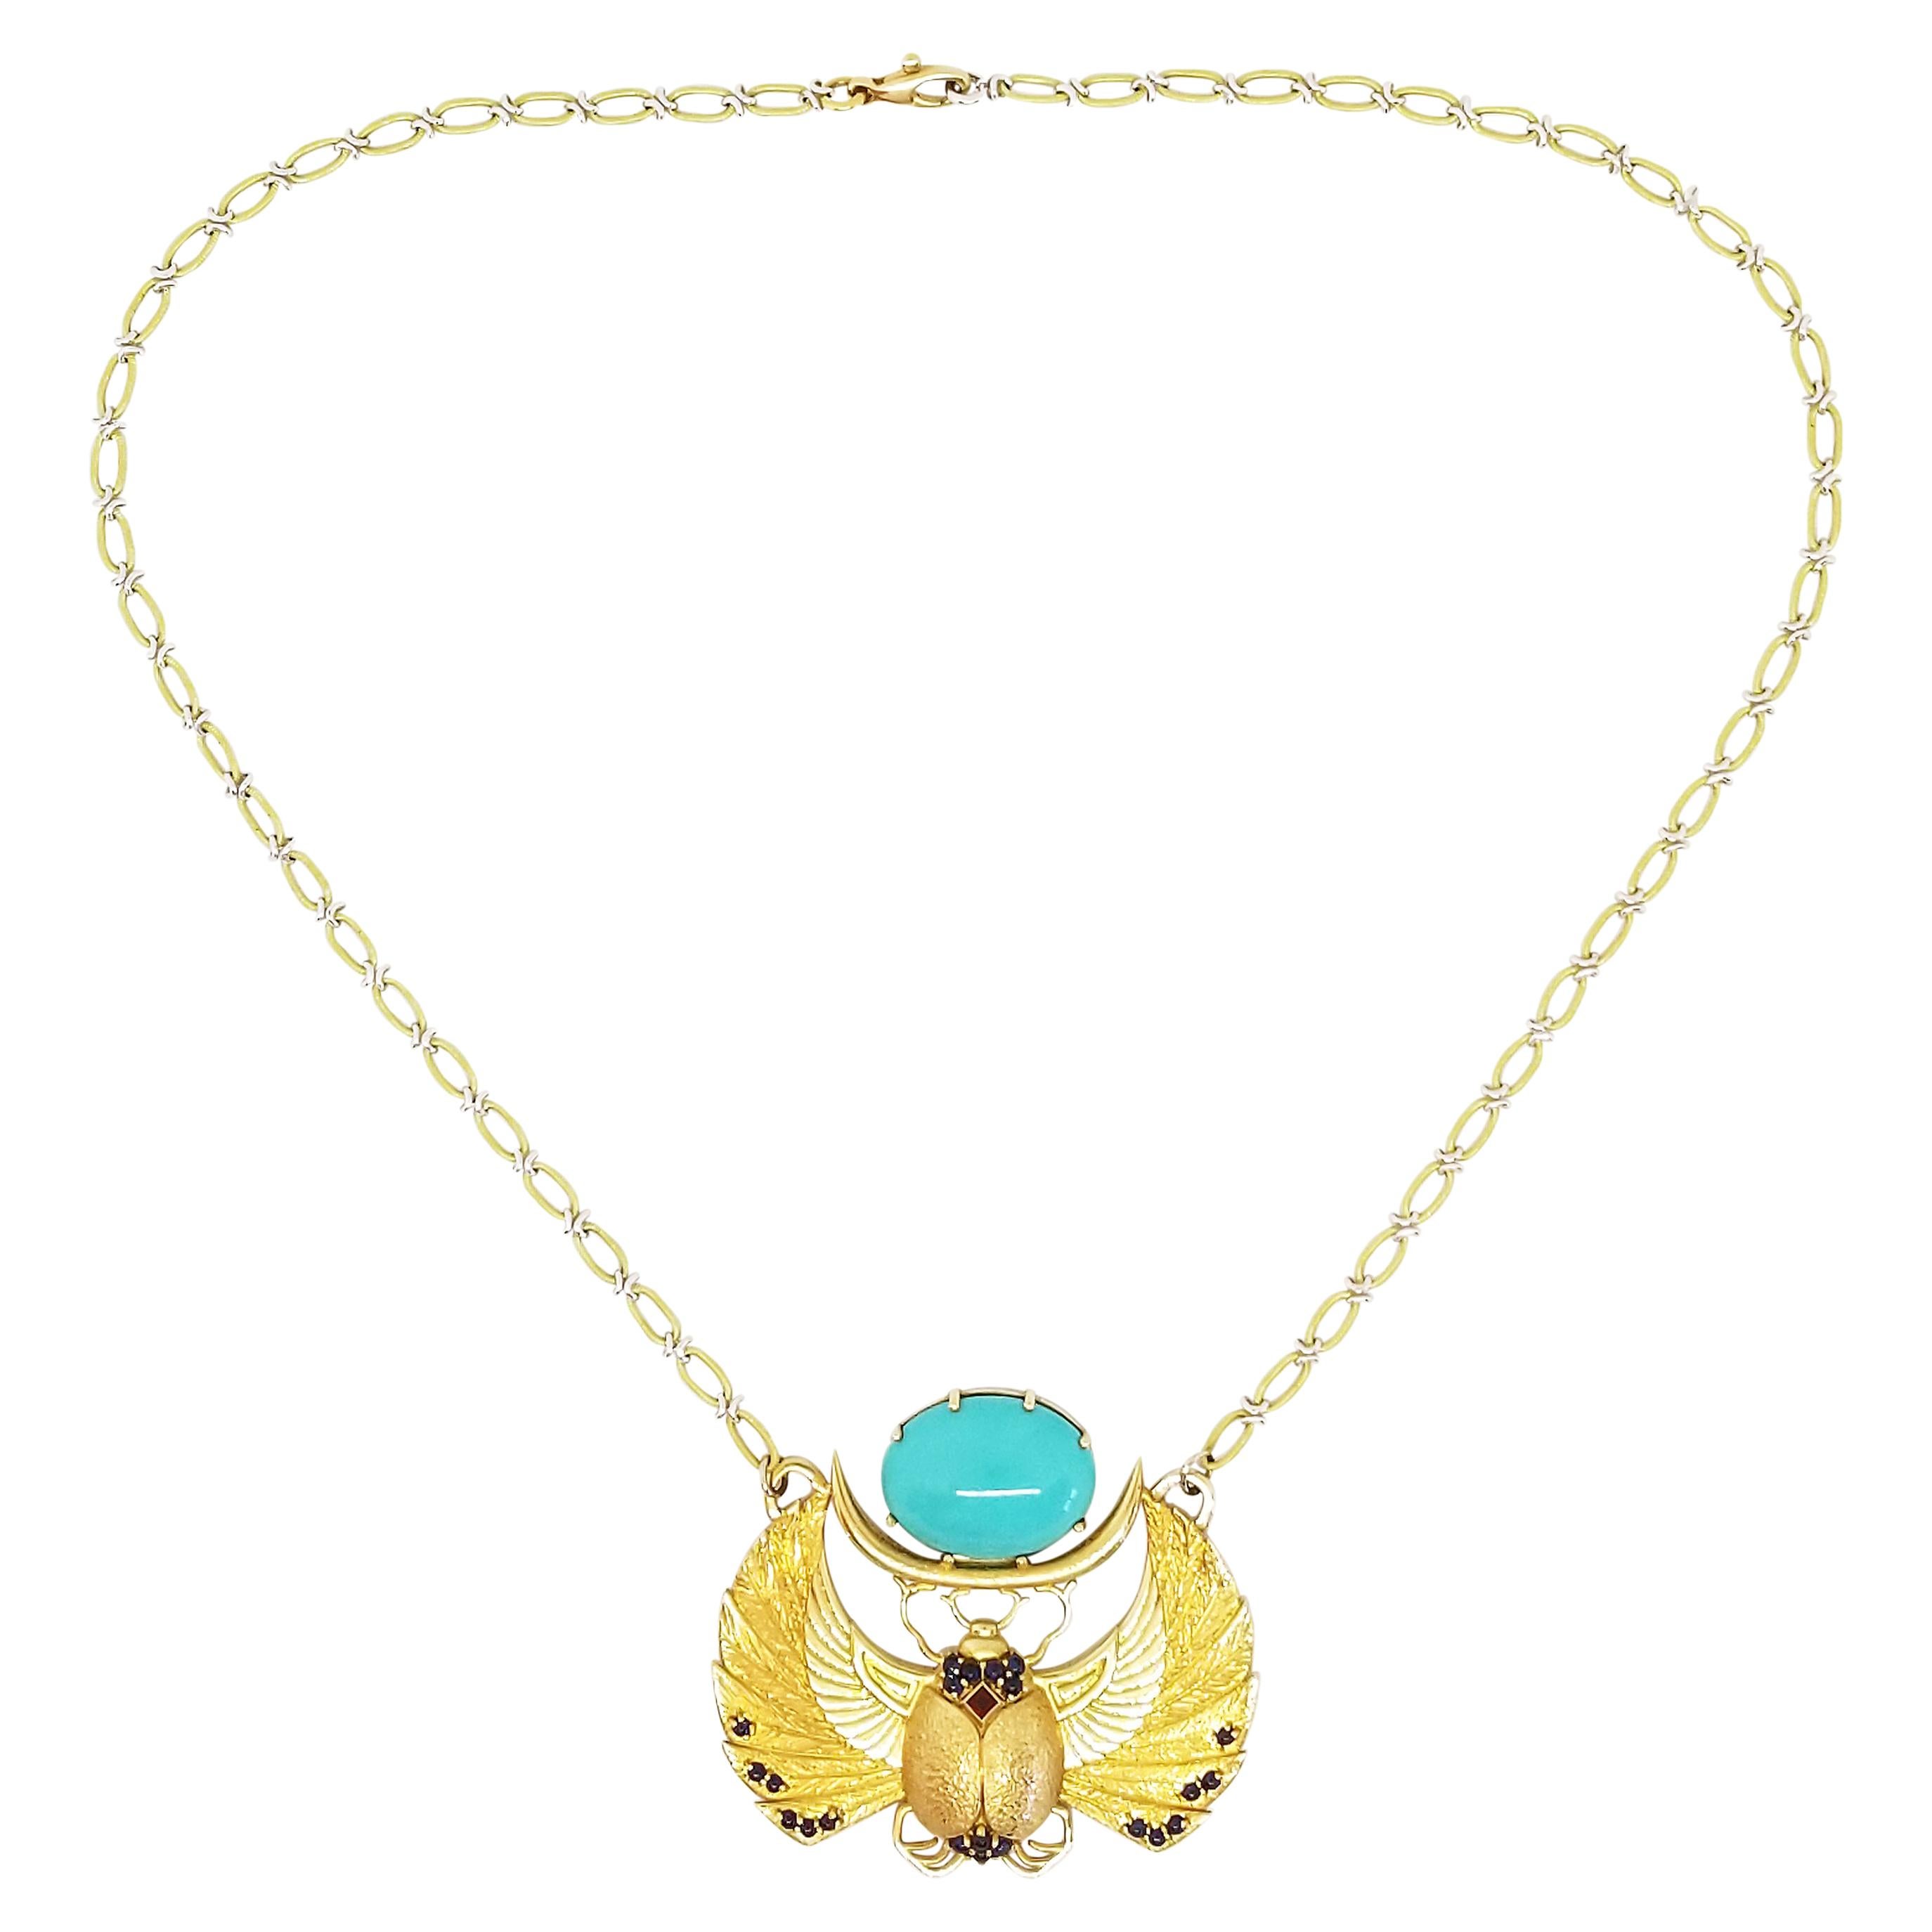 This Custom Designed and Crafted, One of a Kind Statement Necklace by Artisan Tom Castor features a large Winged Scarab as the center piece of this High Design Castor Neck piece. A Unique blend of skilled Egyptian Revival and Contemporary Statement